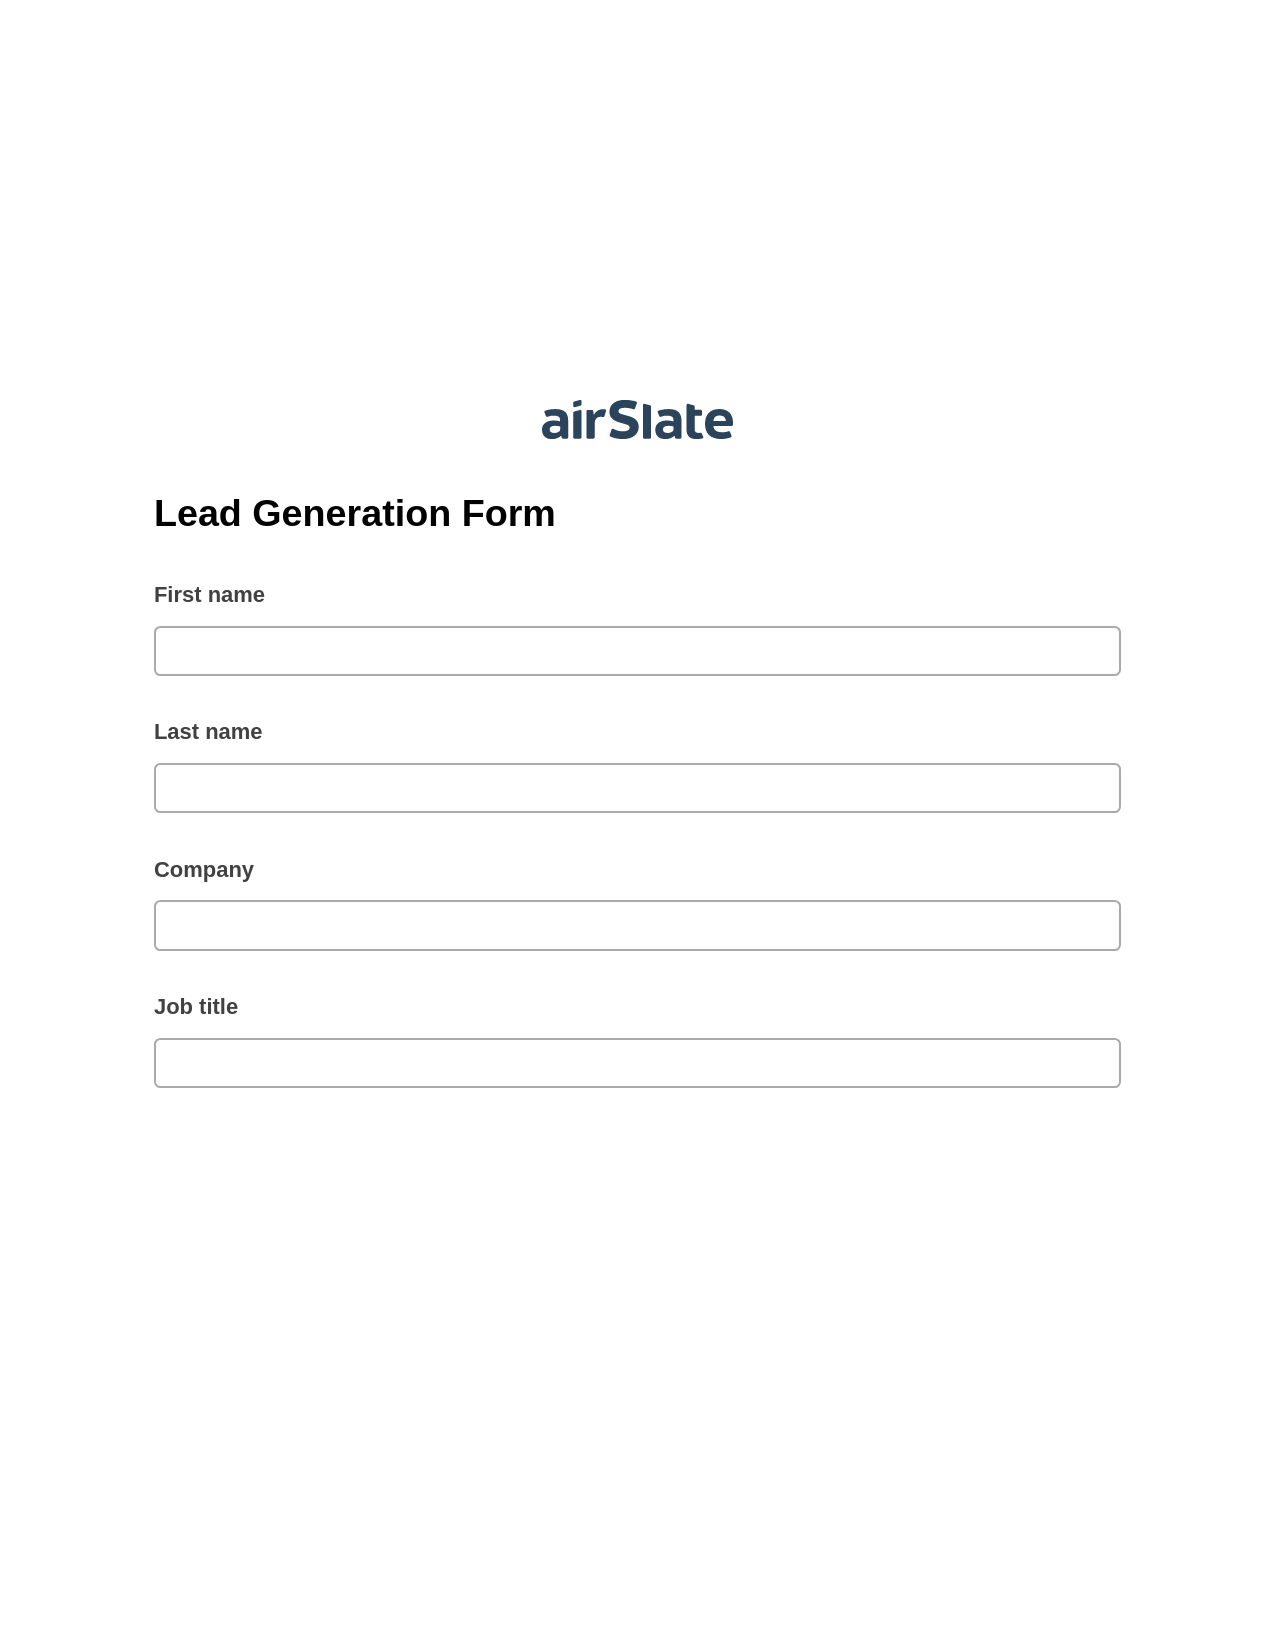 Multirole Lead Generation Form Pre-fill Dropdowns from Google Sheet Bot, Send a Slate to Salesforce Contact Bot, Archive to SharePoint Folder Bot